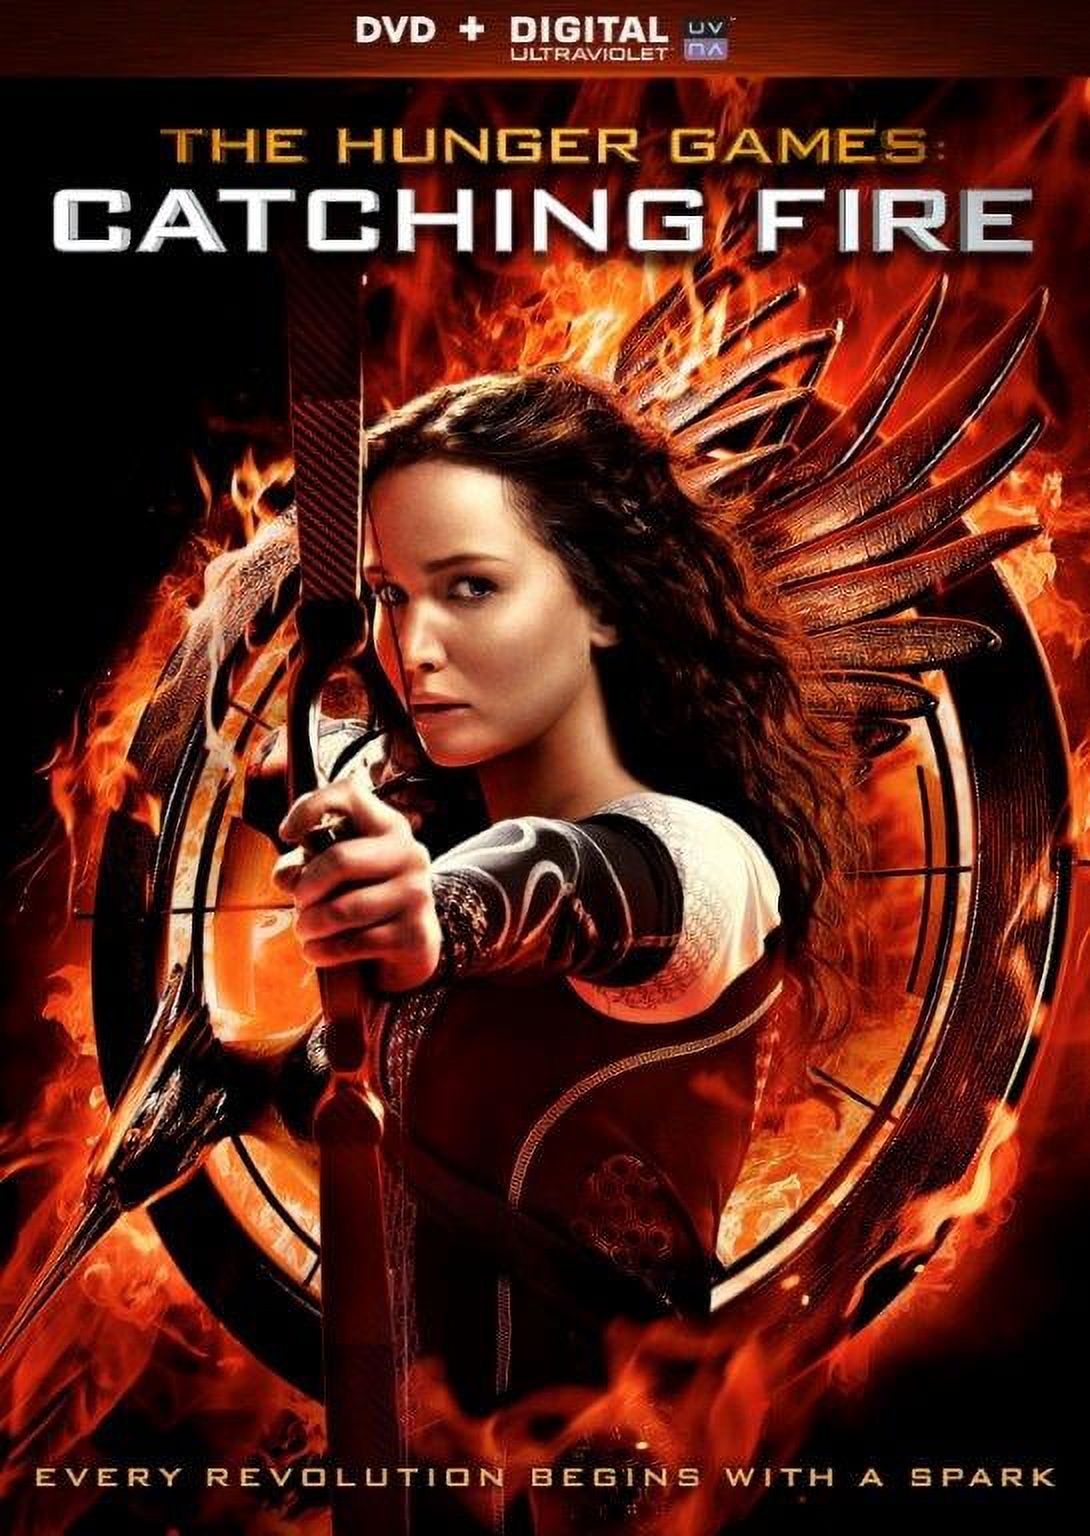 The Hunger Games & Catching Fire 2 Movie Set (DVD Ultraviolet) - image 2 of 2